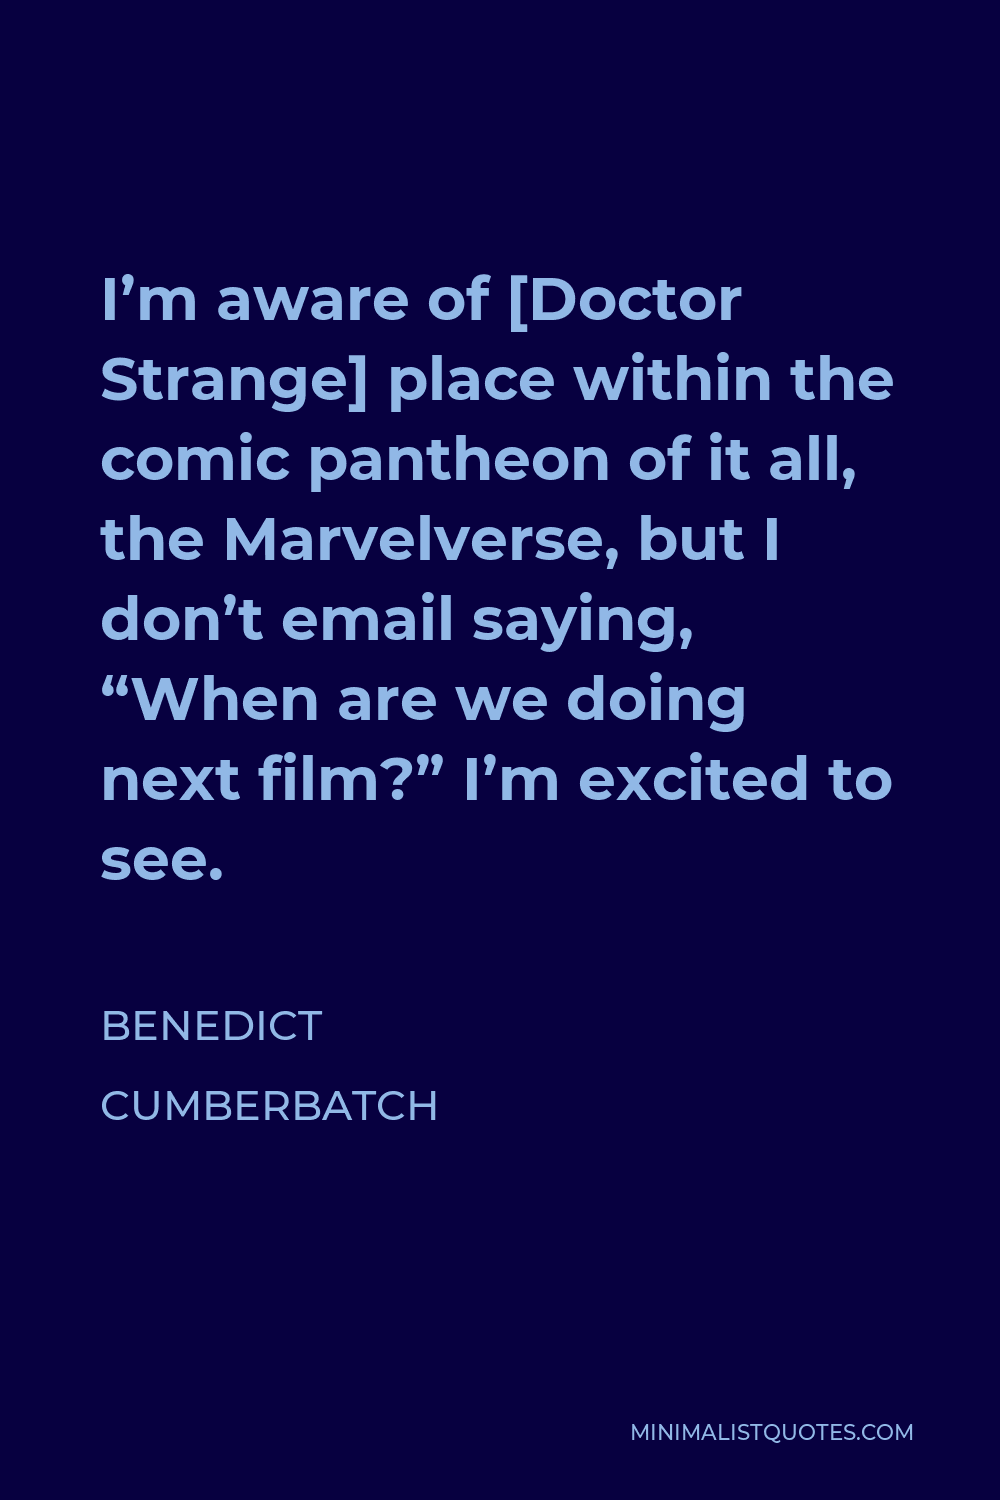 Benedict Cumberbatch Quote - I’m aware of [Doctor Strange] place within the comic pantheon of it all, the Marvelverse, but I don’t email saying, “When are we doing next film?” I’m excited to see.